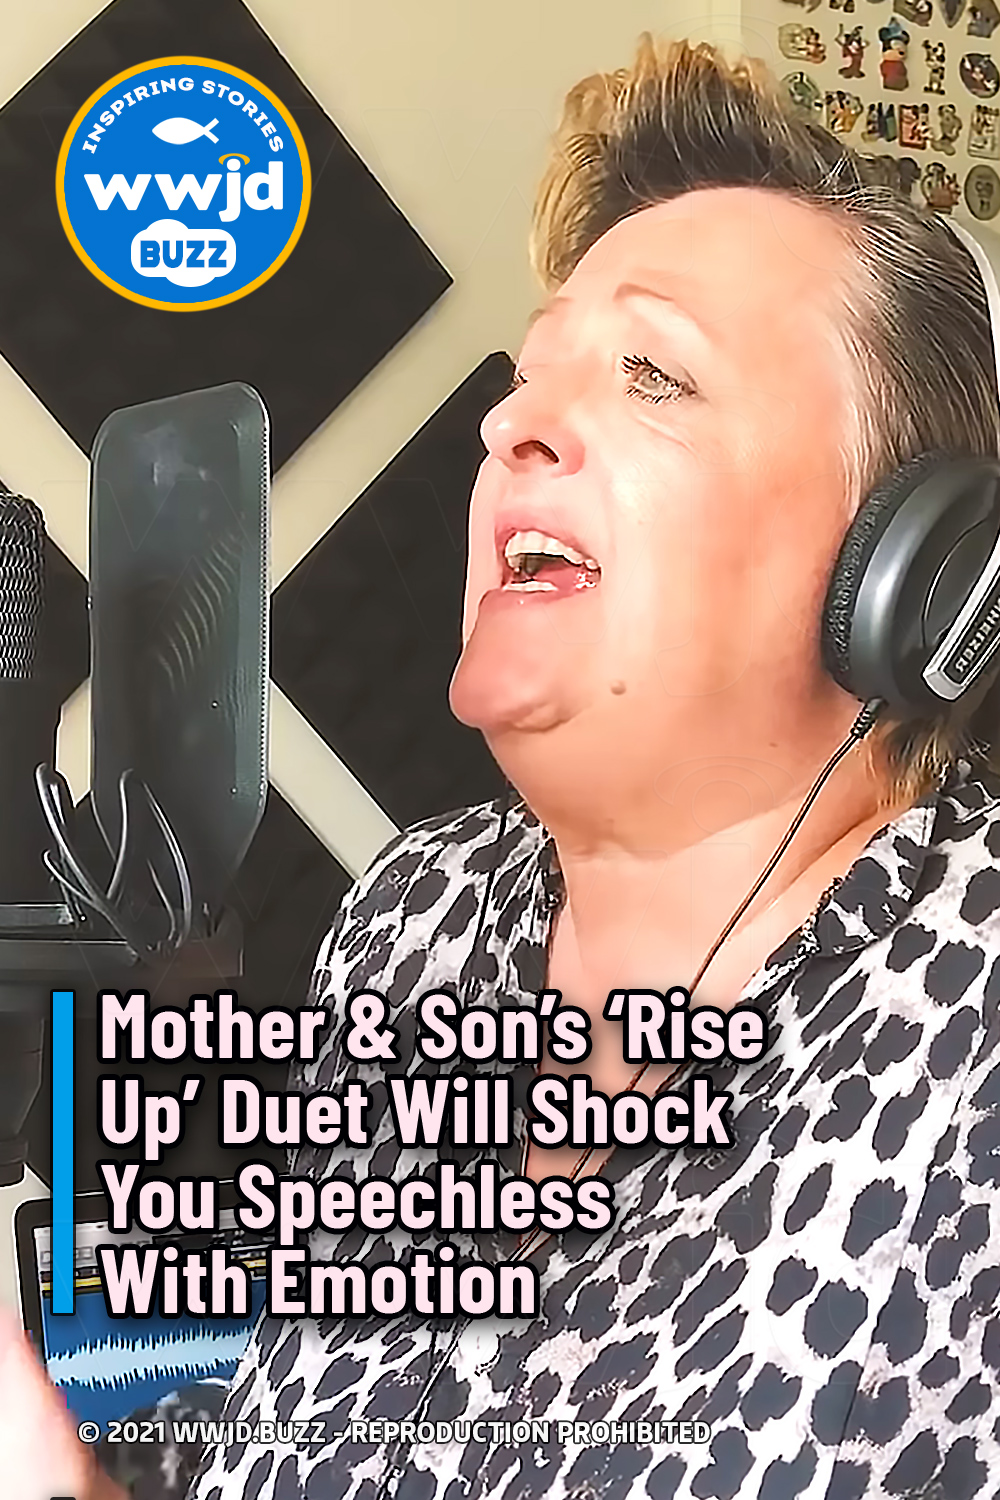 Mother & Son’s ‘Rise Up’ Duet Will Shock You Speechless With Emotion